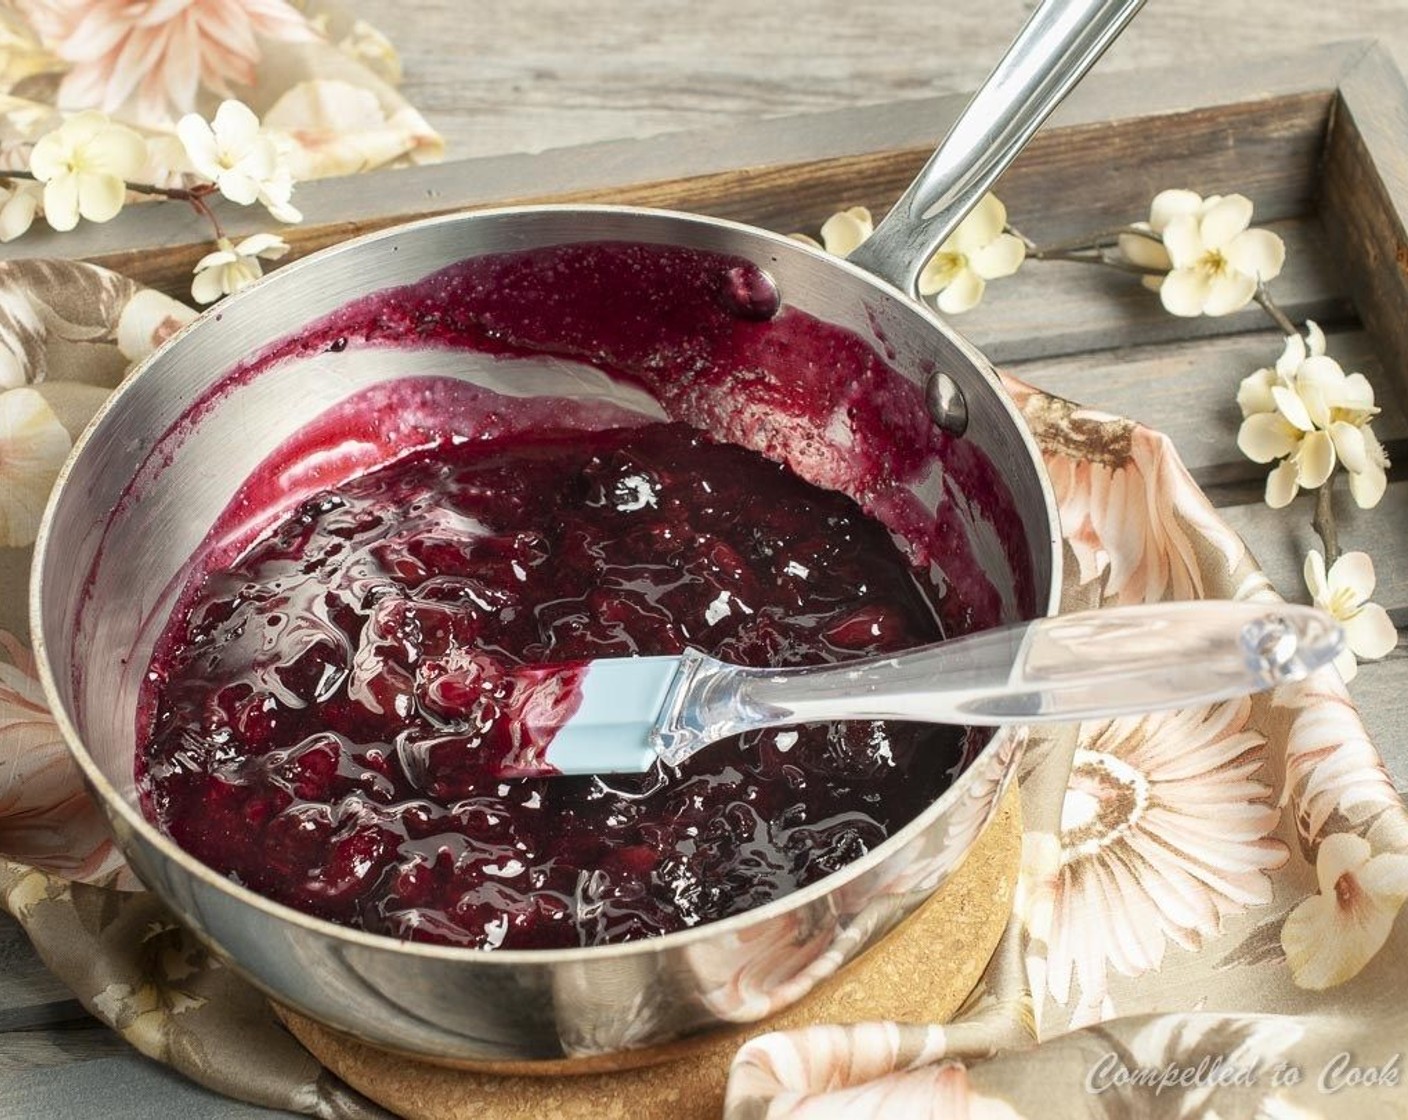 step 1 Combine Frozen Cherries (2 cups) and Granulated Sugar (1/4 cup) in a medium saucepan and cook over medium heat until cherries are soft and syrupy, about 10 minutes.